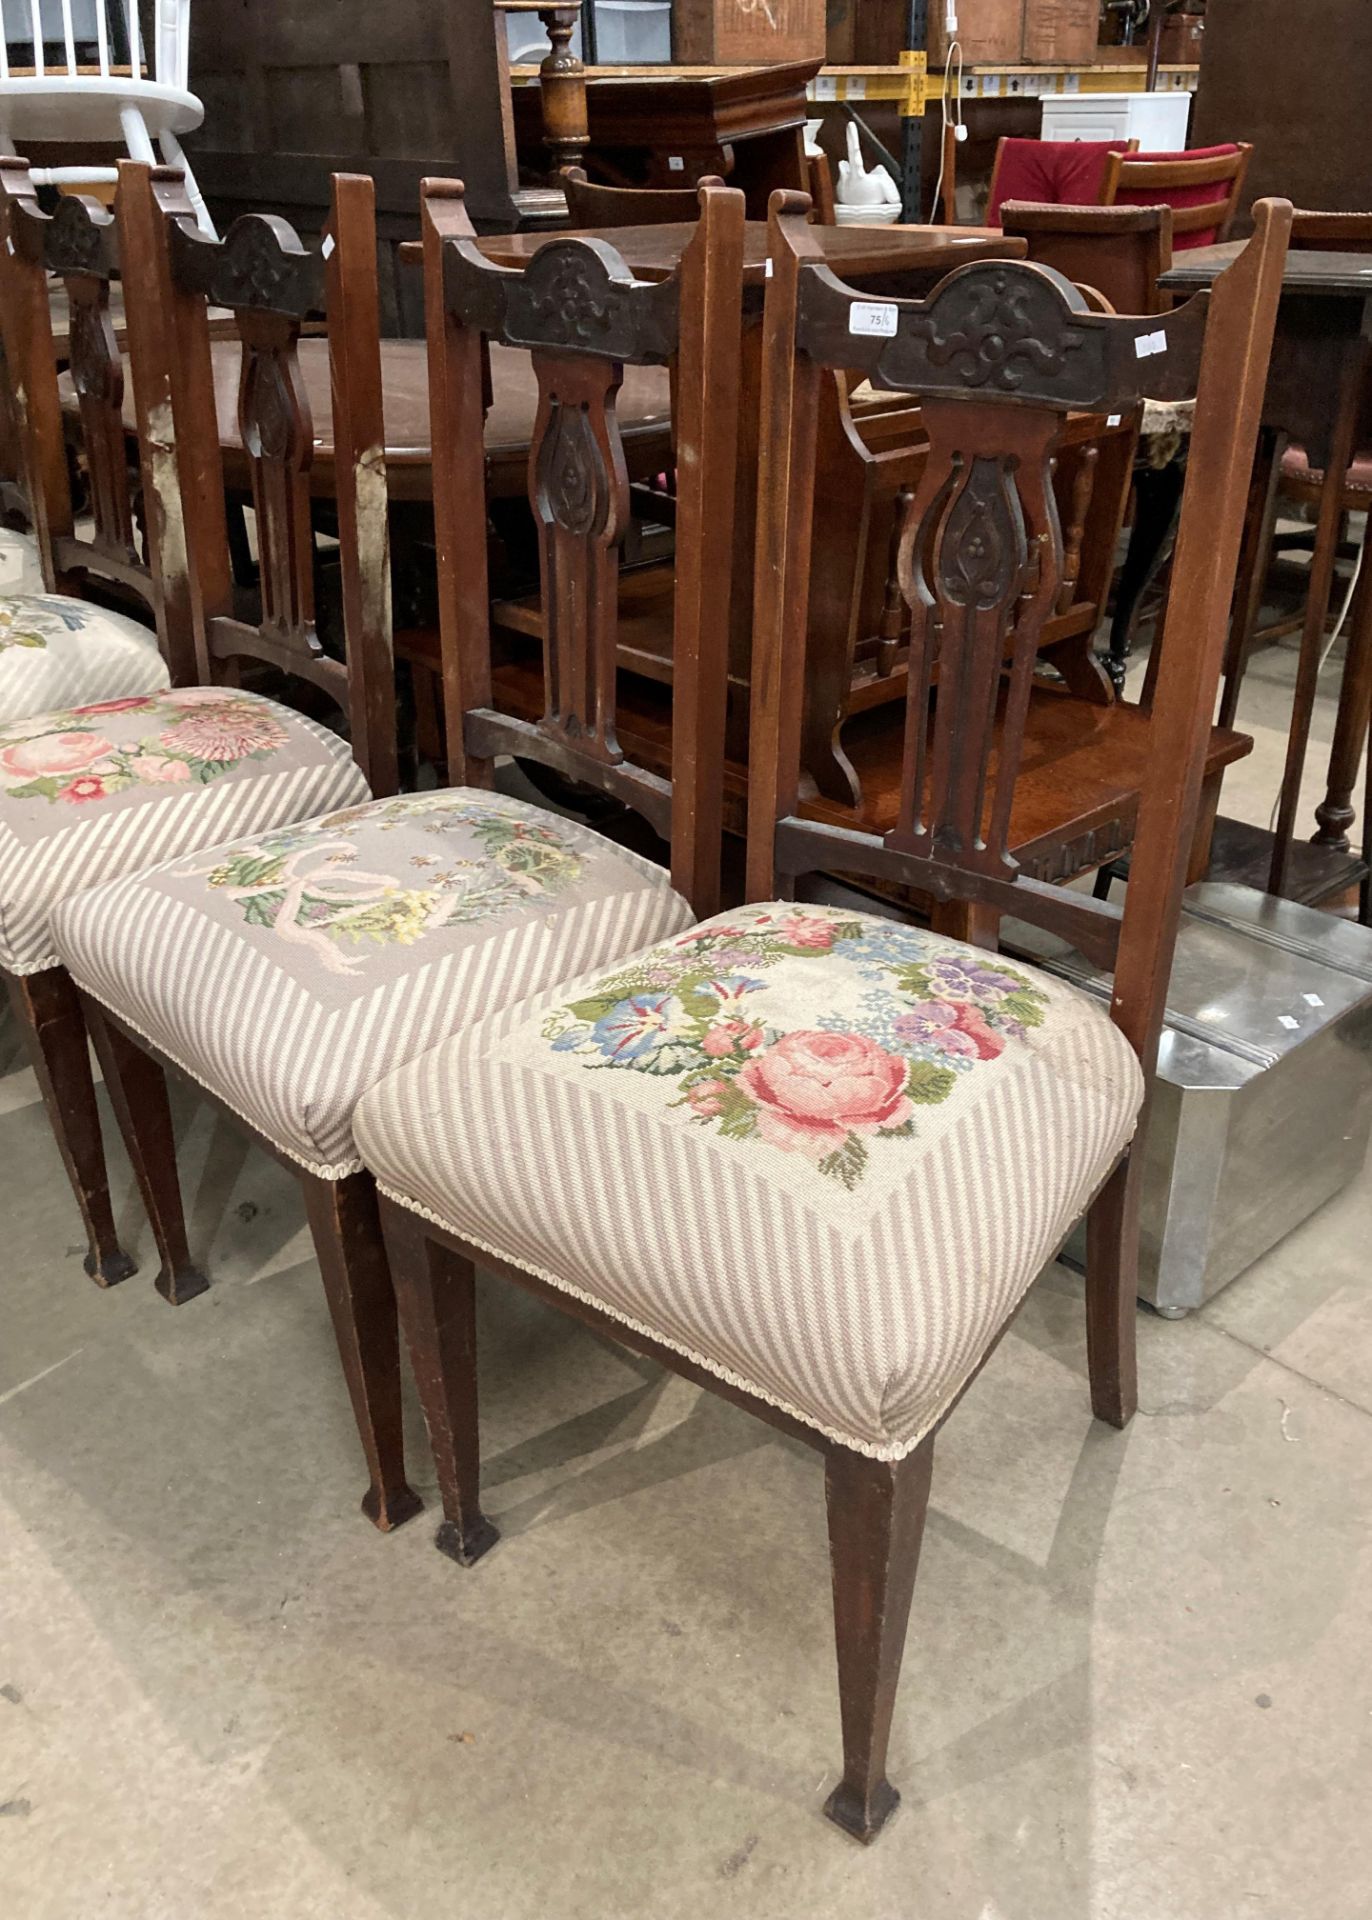 A set of six mahogany dining chairs with floral fabric seats (S2T) - Image 2 of 3